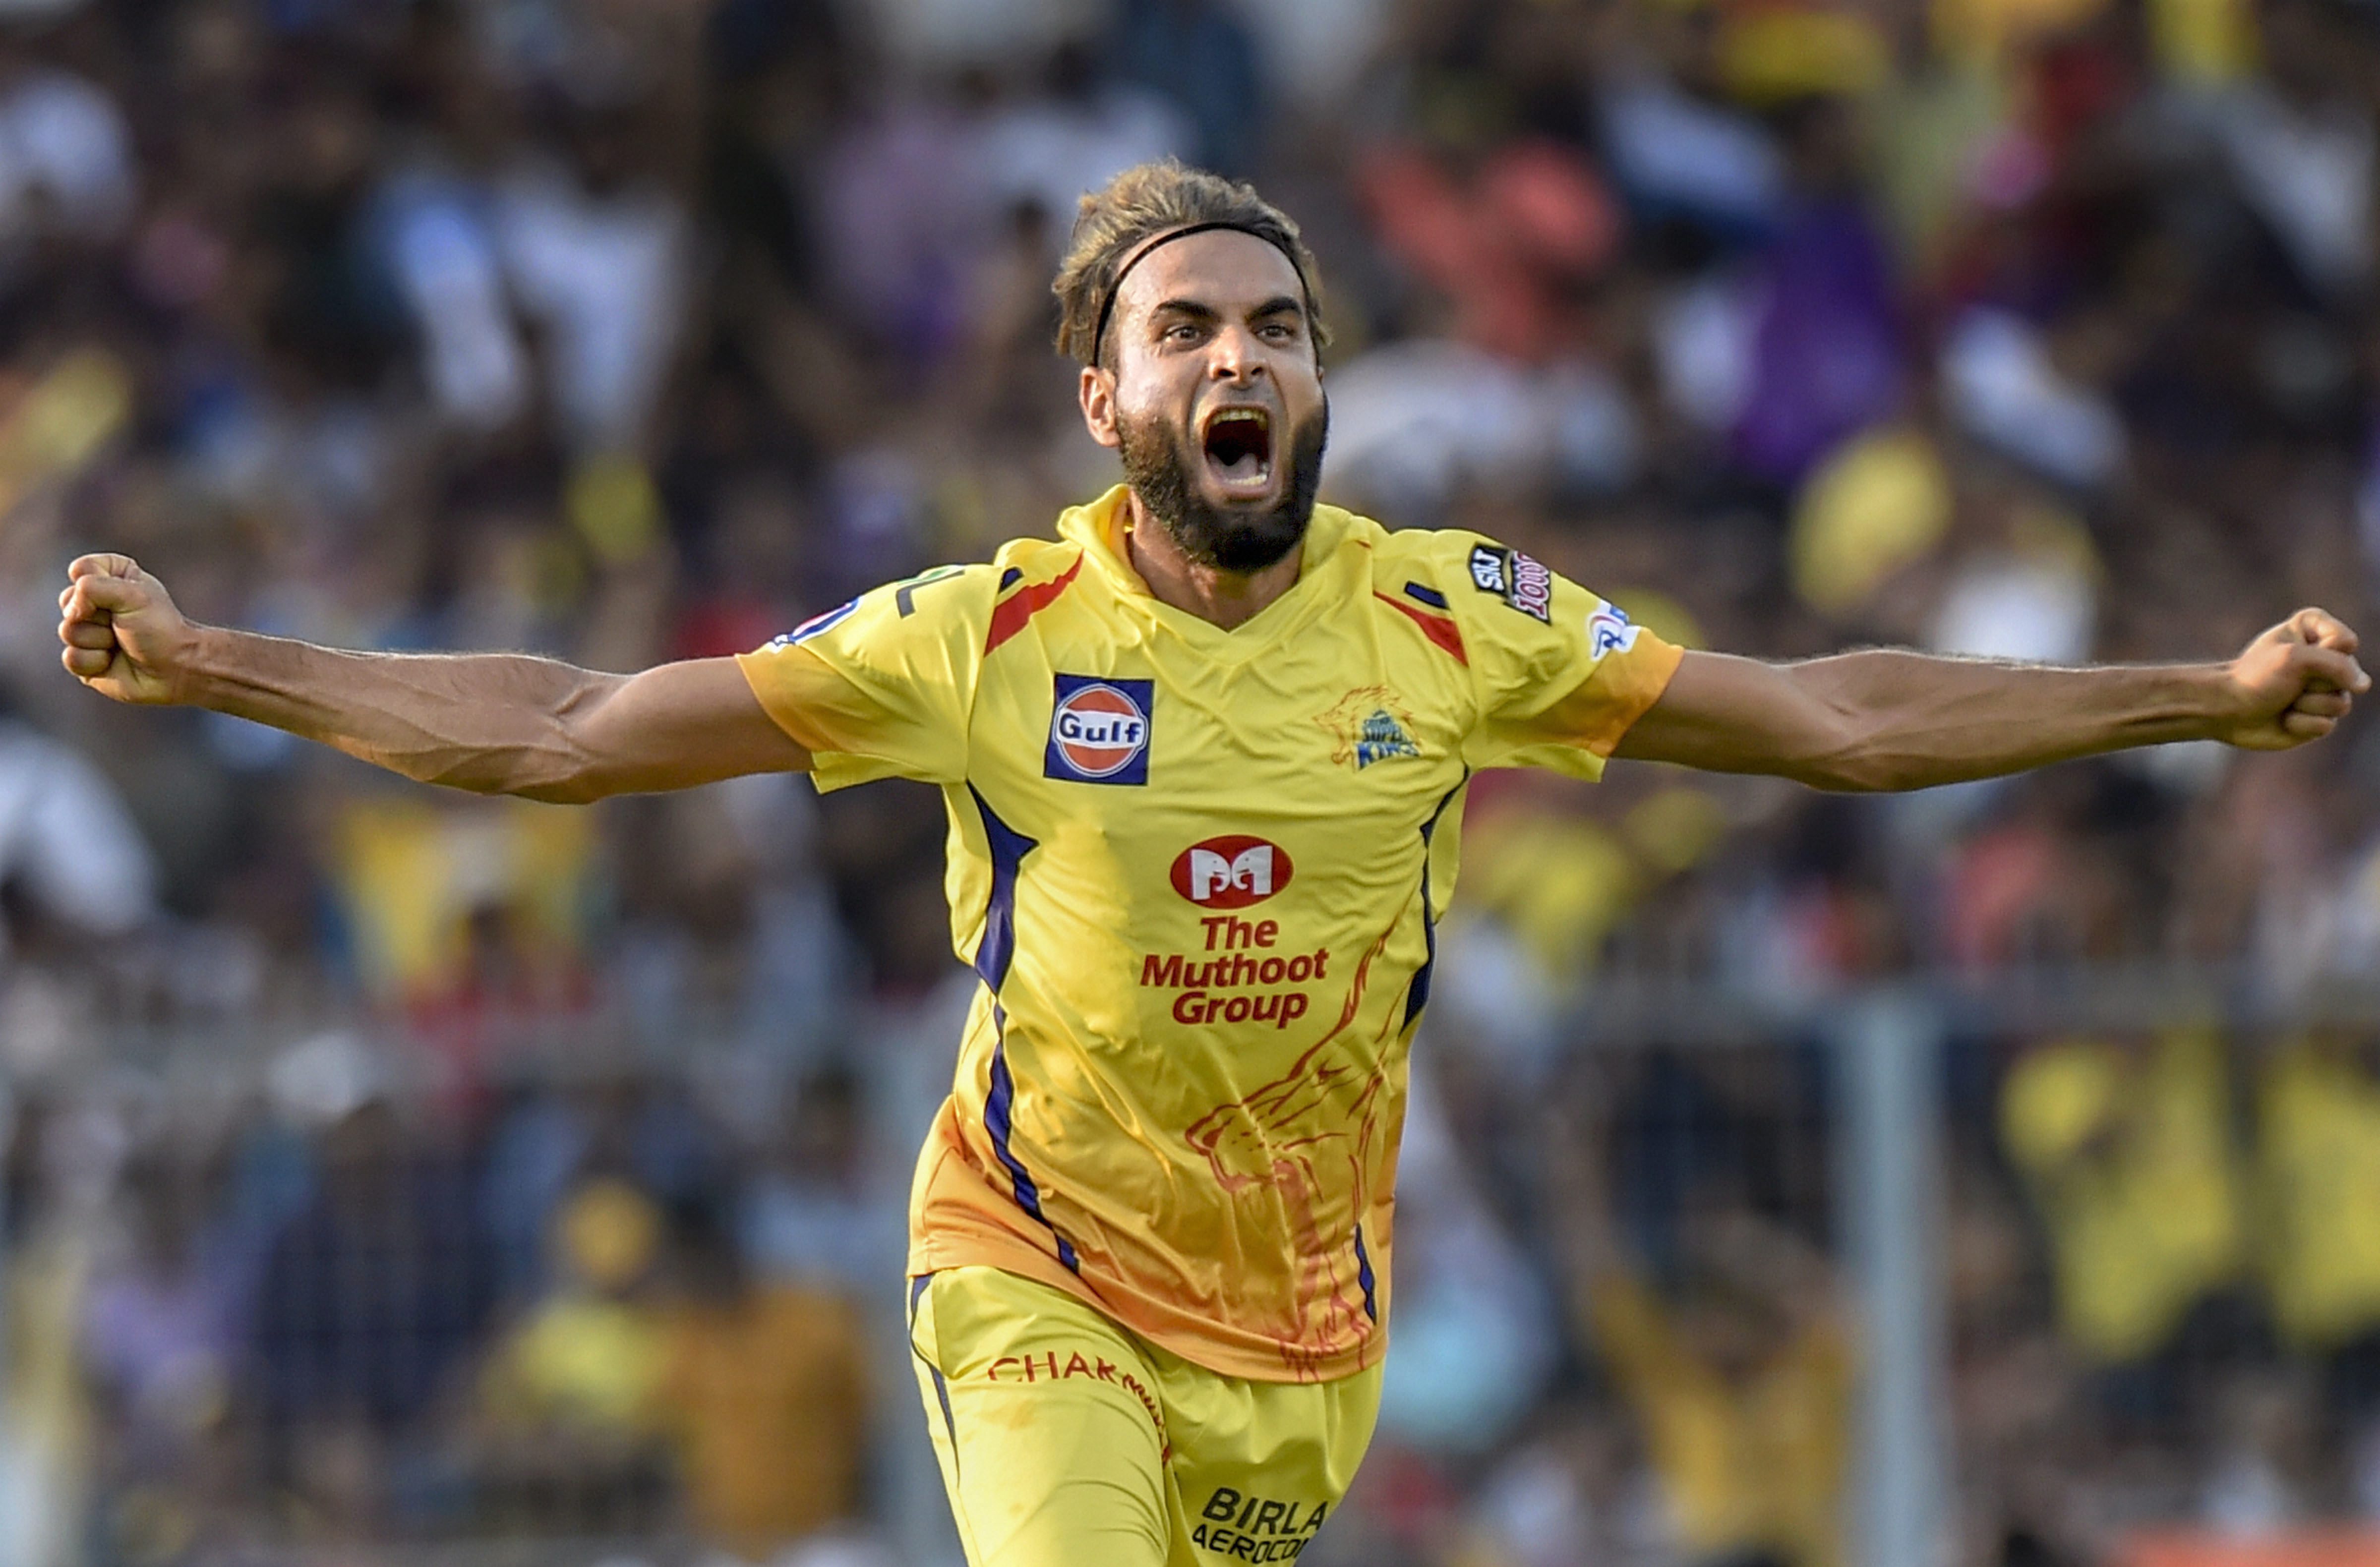 Daily wrap: Ambedkar Day celebrations restricted; CSK defeat KKR by 5 wickets